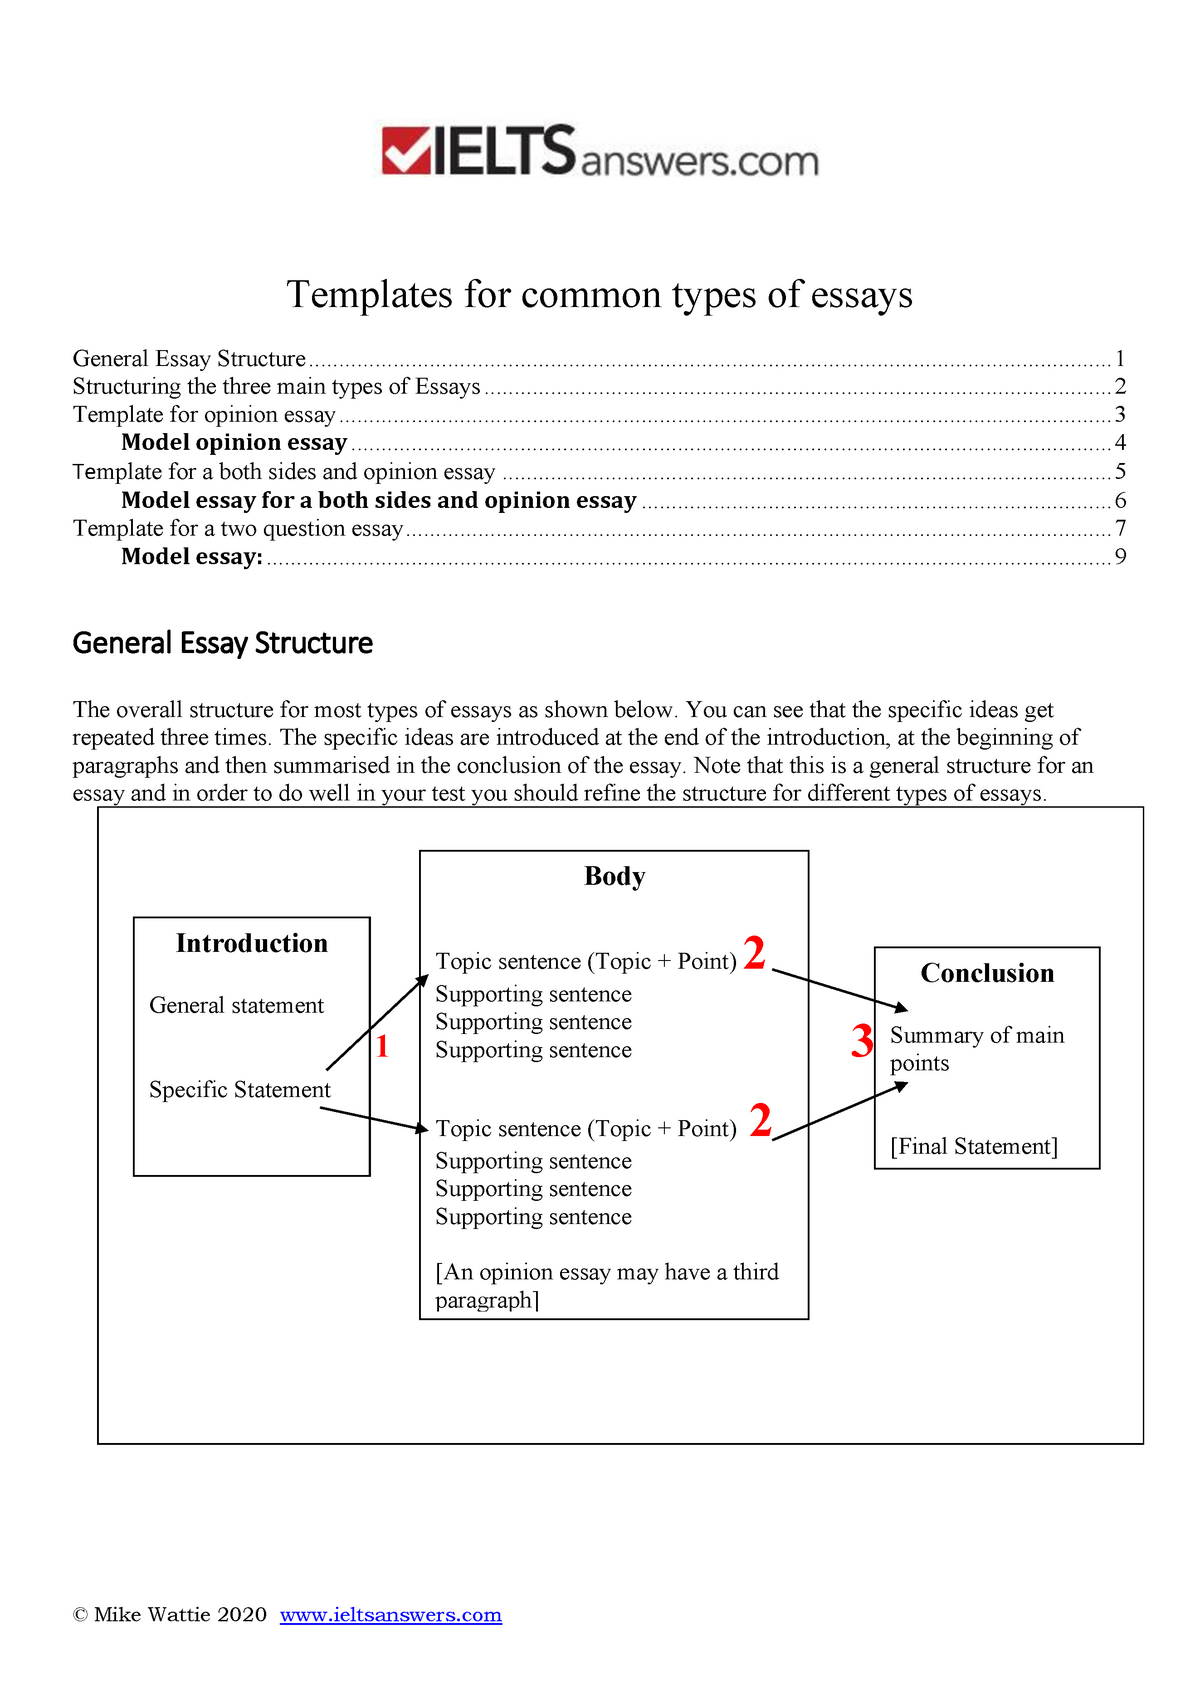 templates-for-the-three-main-types-of-essaysdasd-templates-for-common